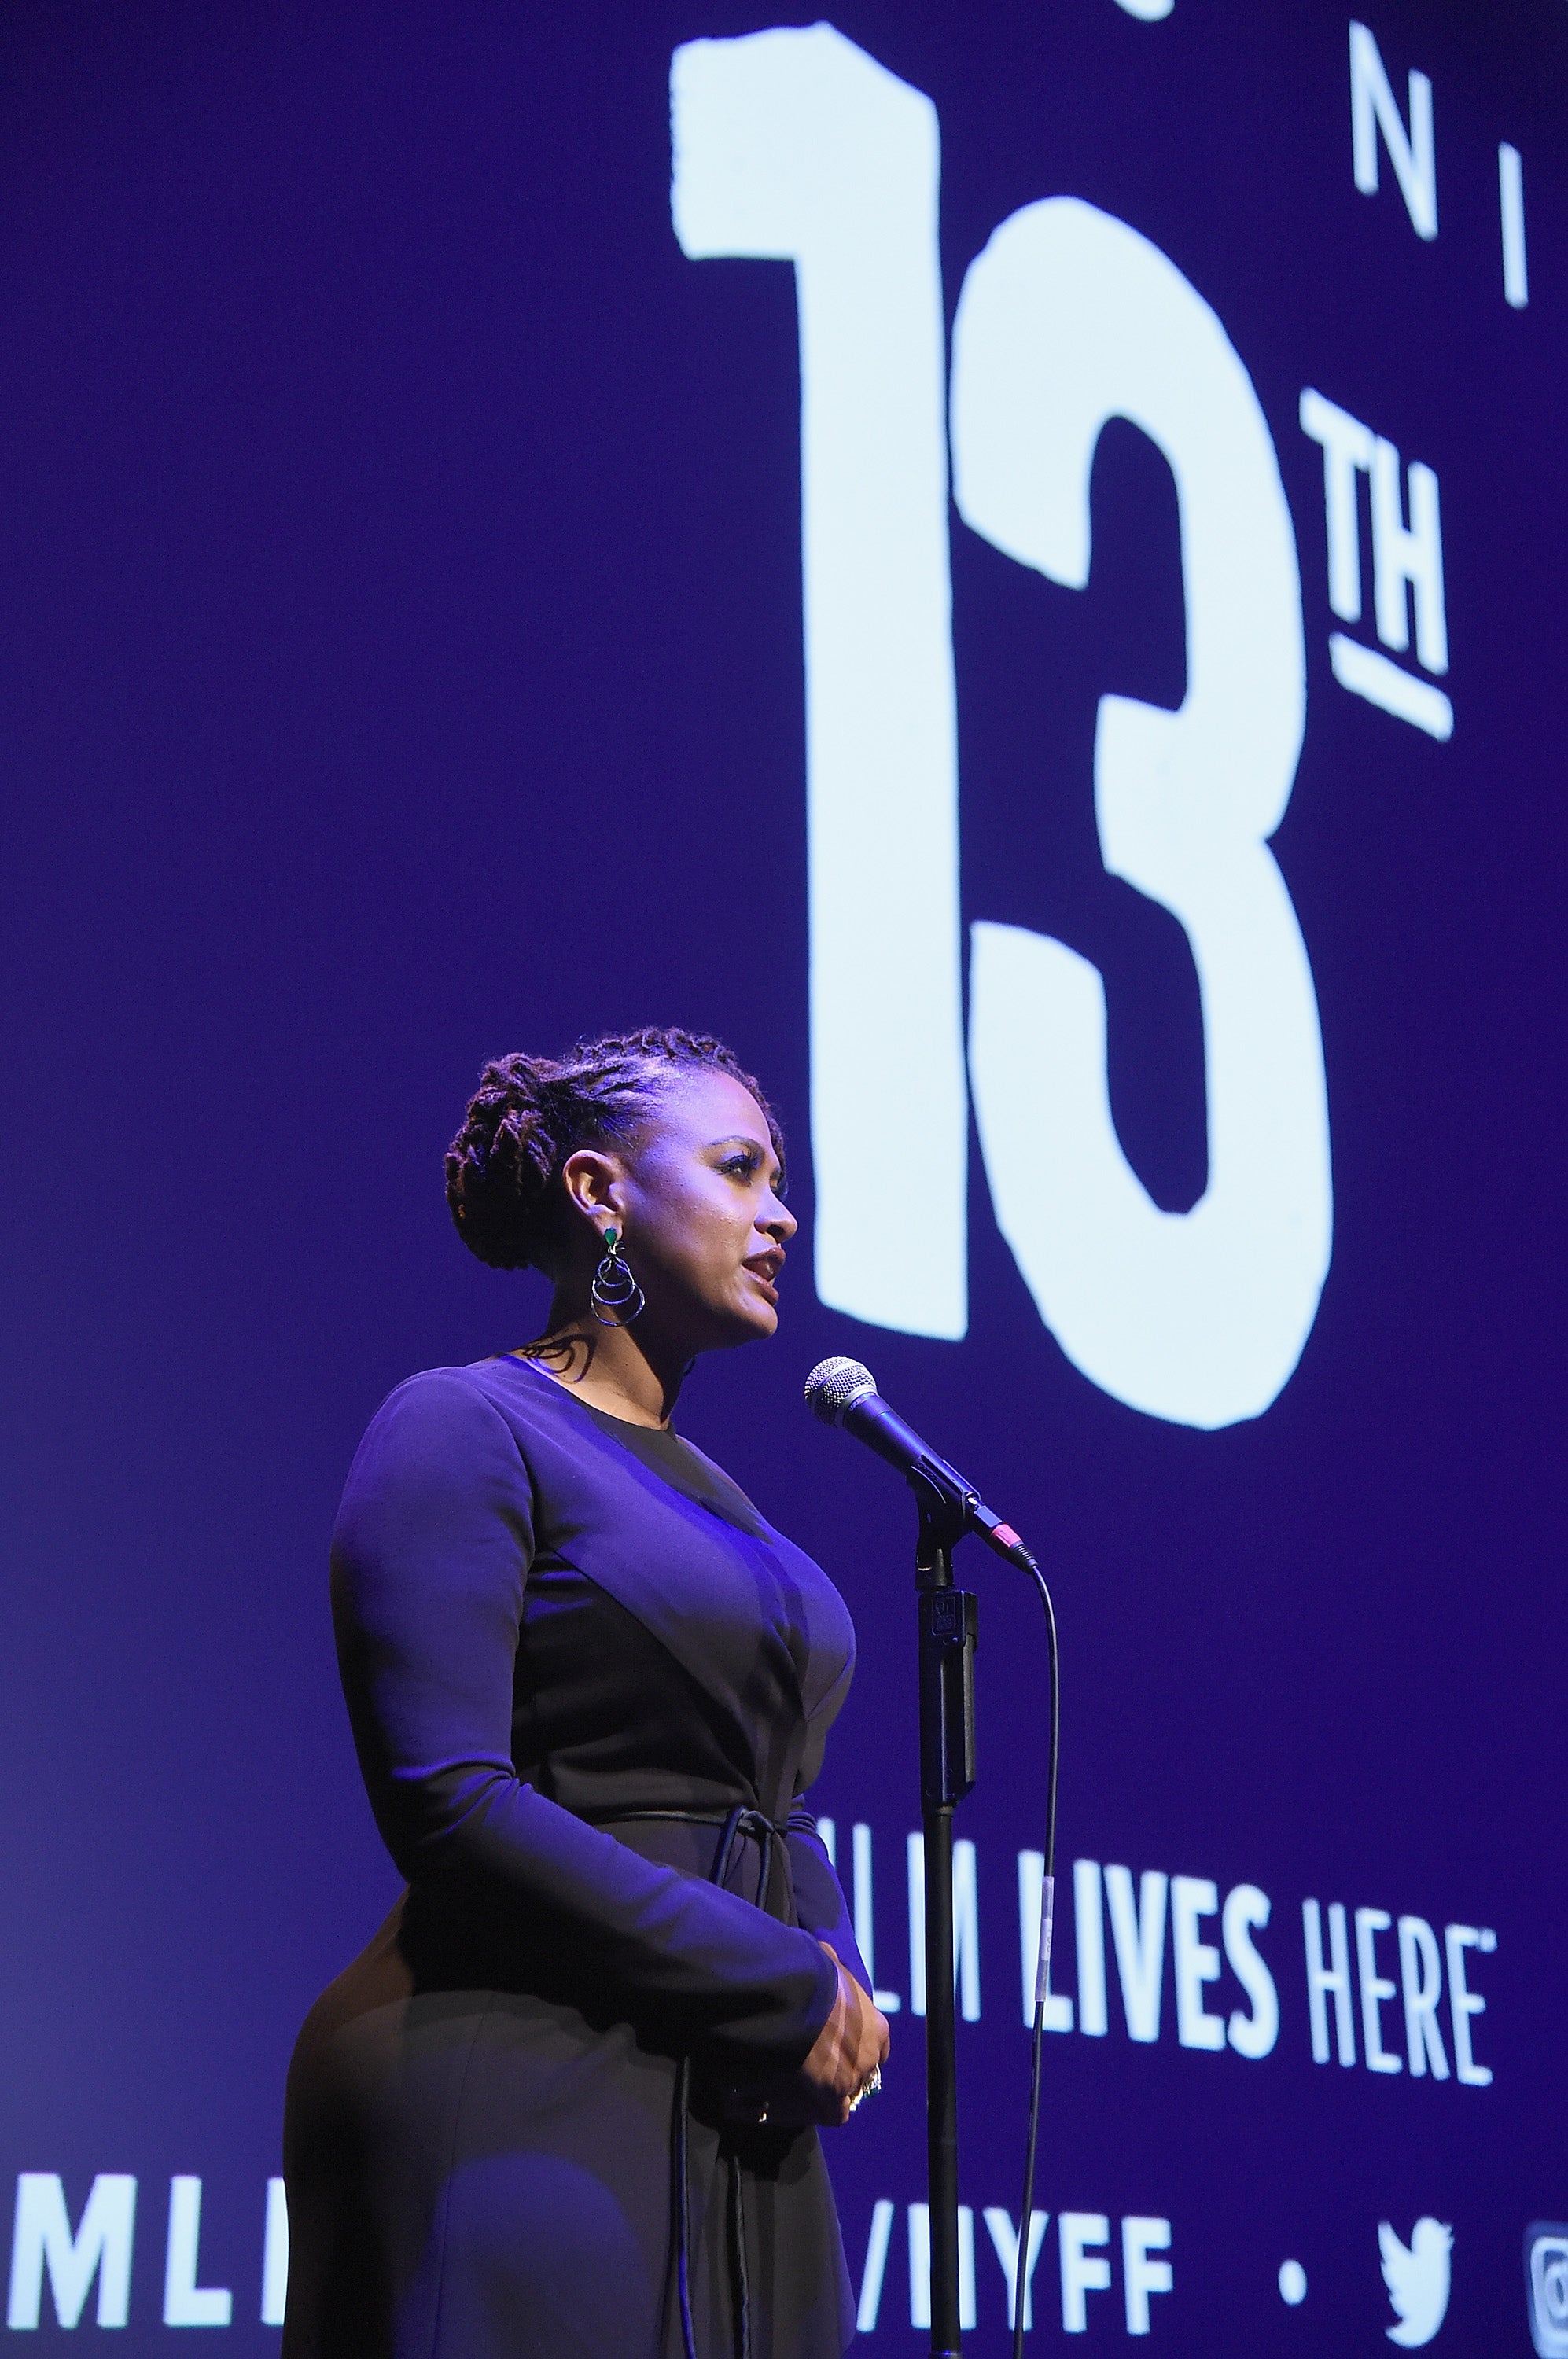 Slavery, Incarceration & Racism: 14 Disturbing Connections Examined In Ava DuVernay’s Oscar-Nominated ’13th’ Documentary